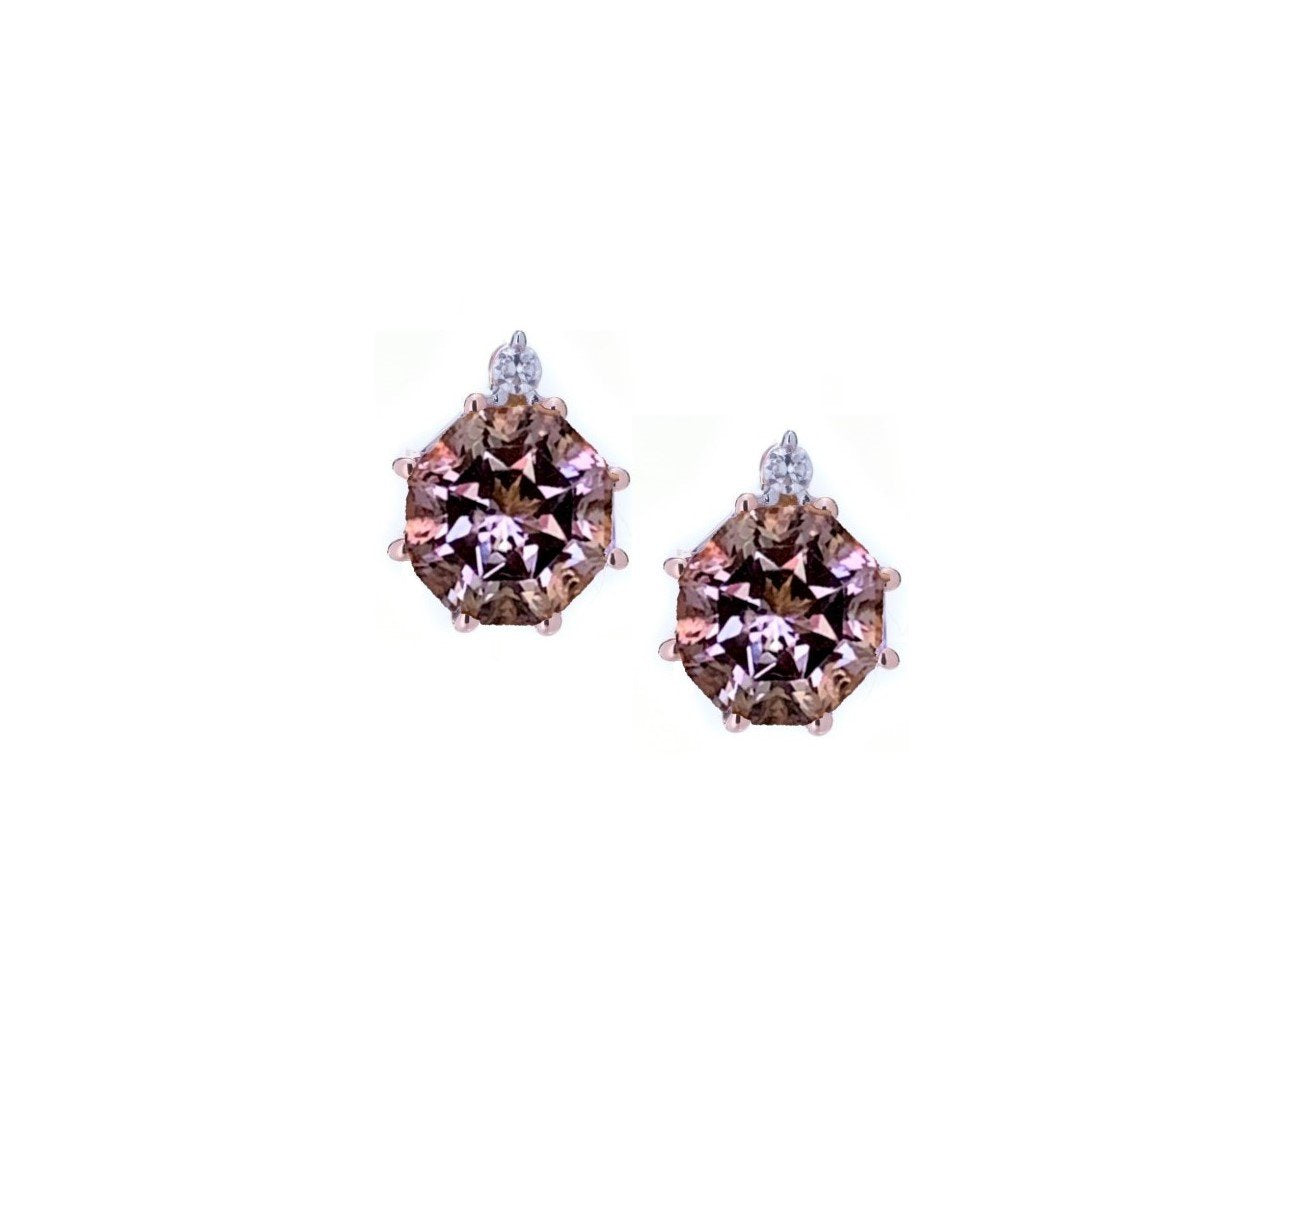 FARA Pink Amethyst & Natural White Zircon Earrings 18K Rose Gold Plated Silver for Women